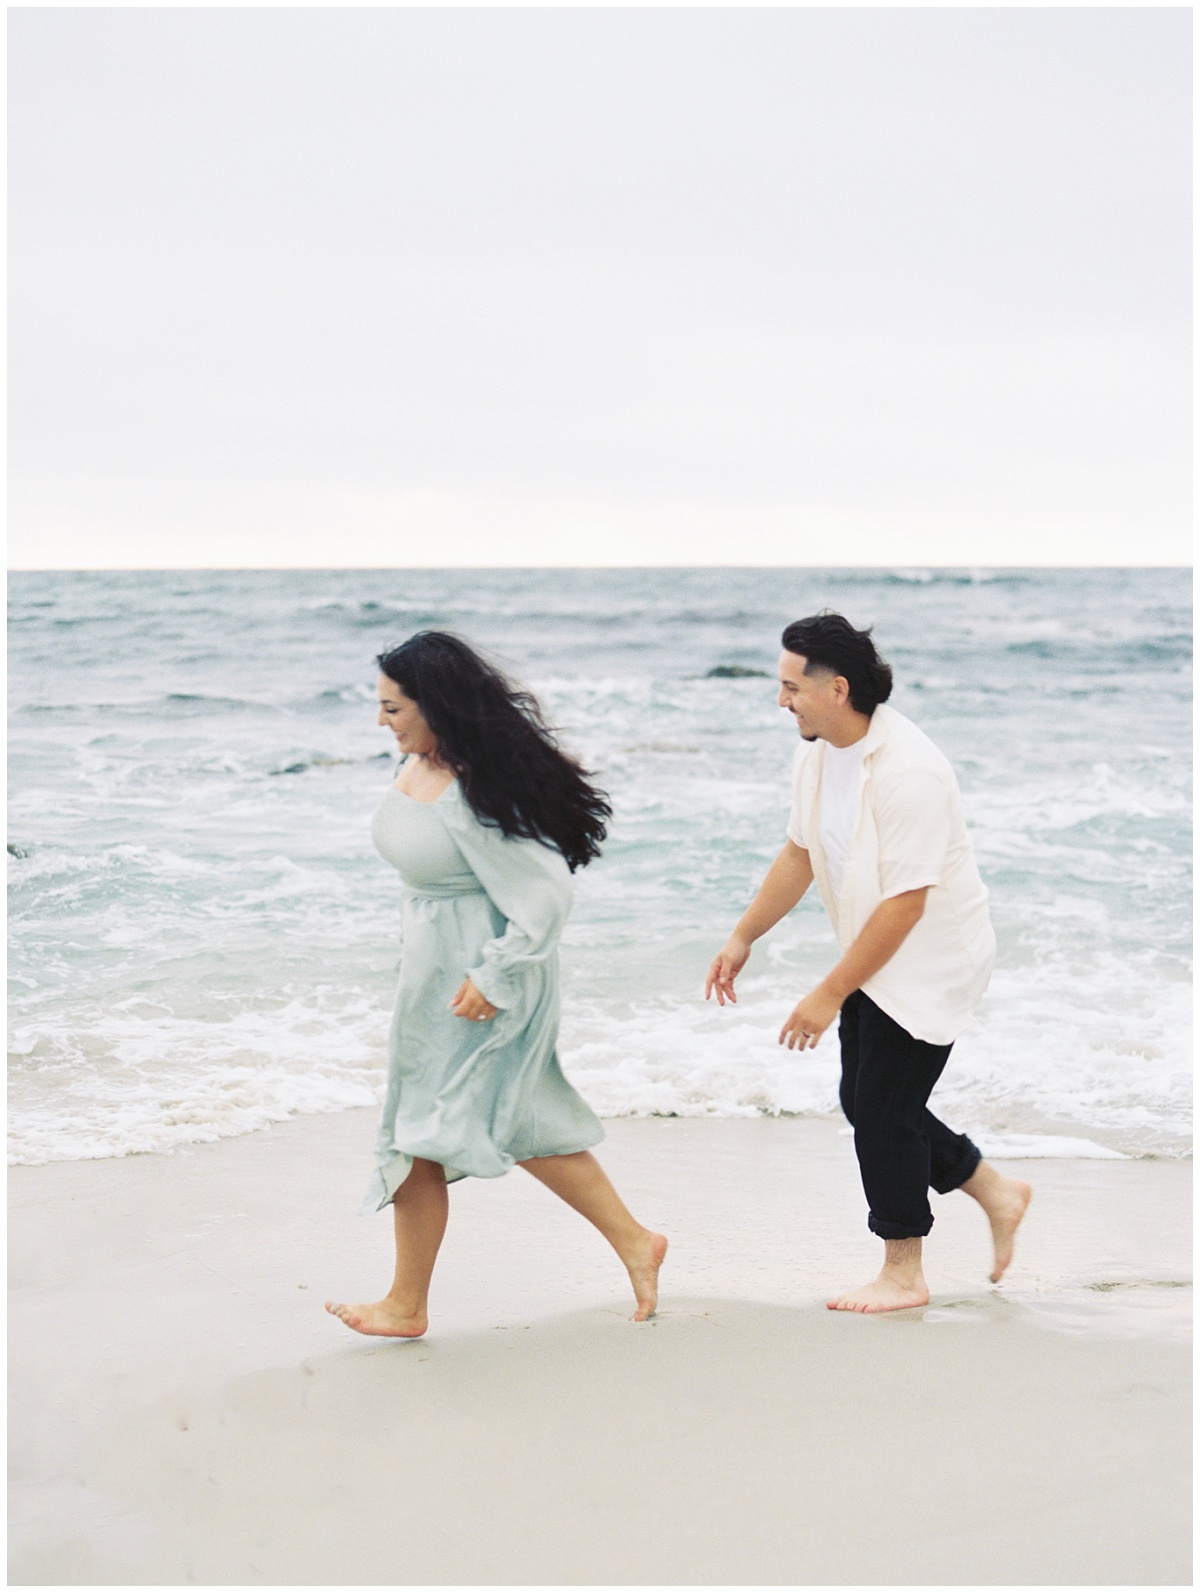 Engagement photo of couple running at the beach playing tag